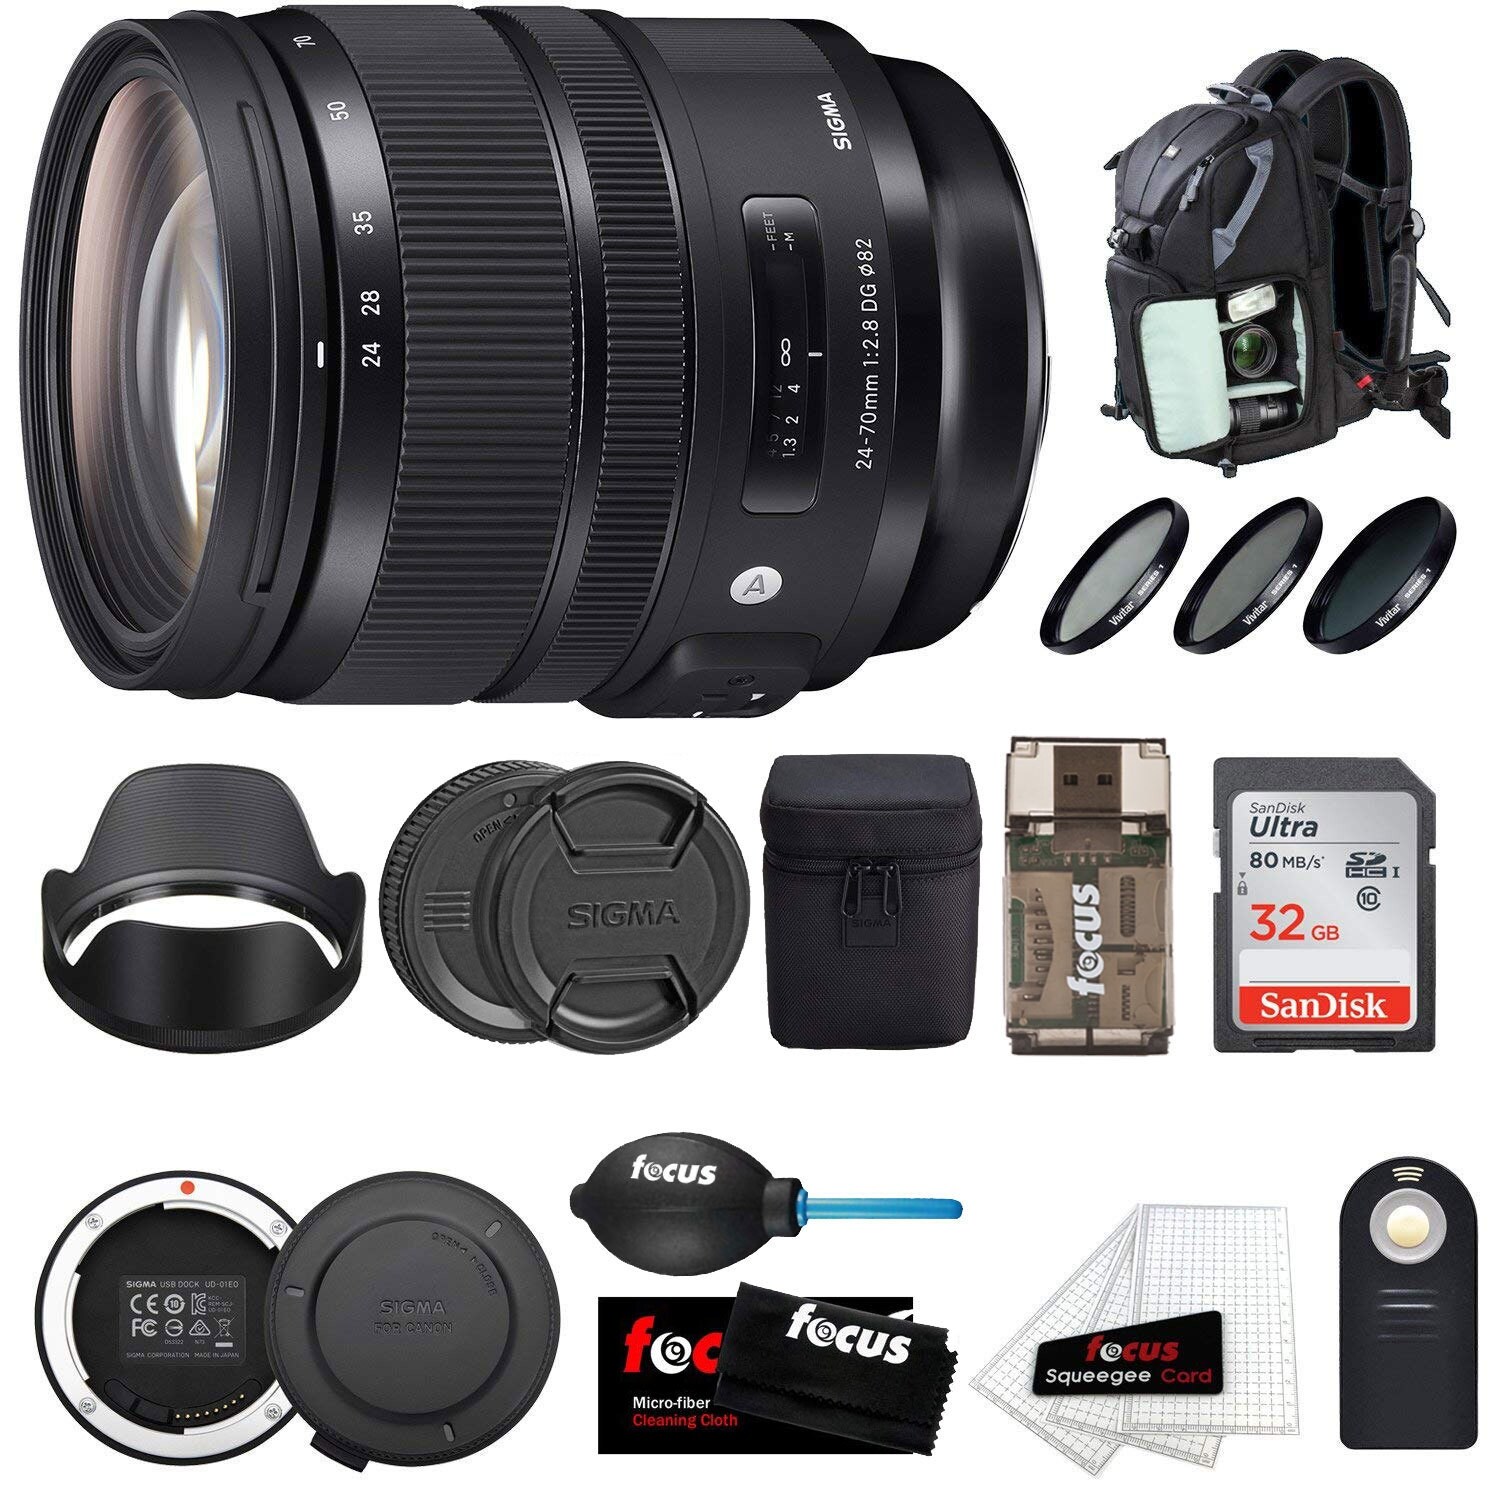 Sigma 24 70mm F 2 8 Dg Os Hsm Art Lens For Canon With Dock And Backpack Bundle Overstock